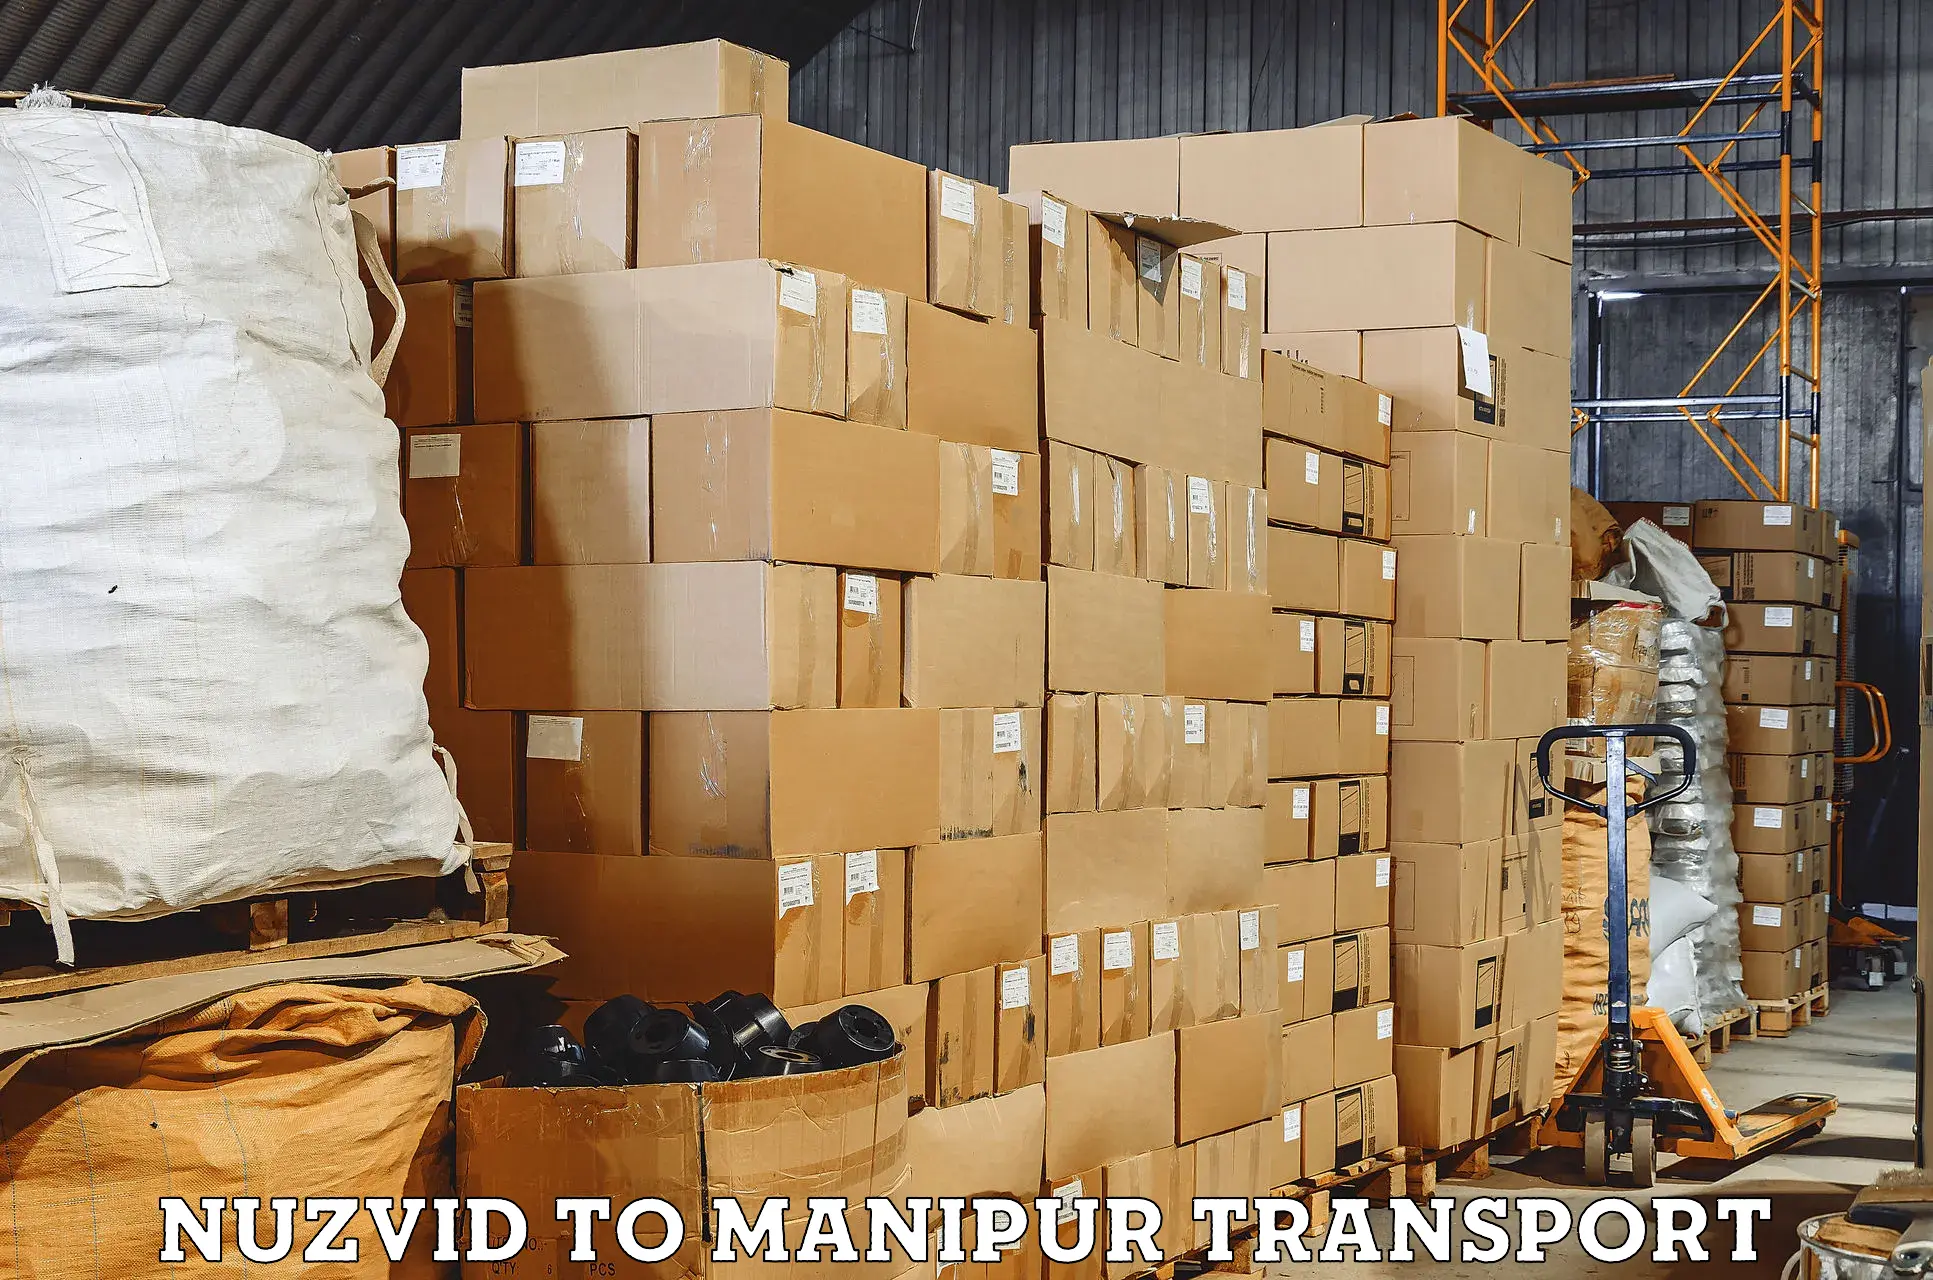 Transport bike from one state to another Nuzvid to Manipur